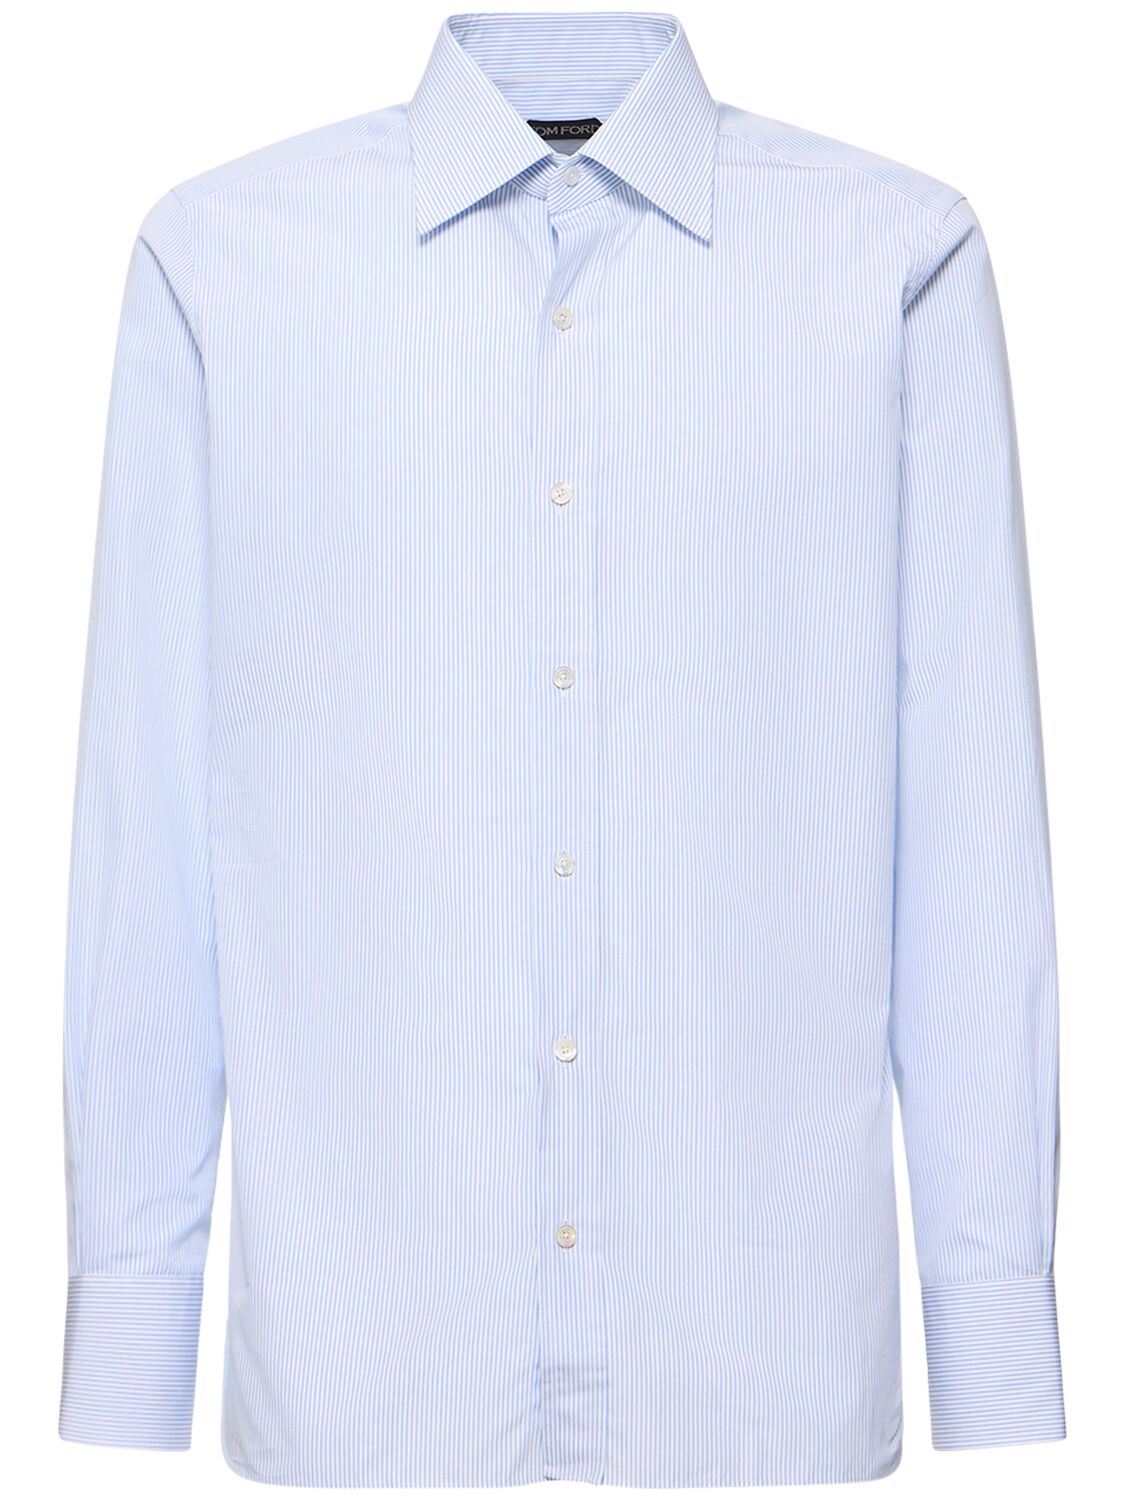 Tom Ford Striped Cotton Shirt In Blue